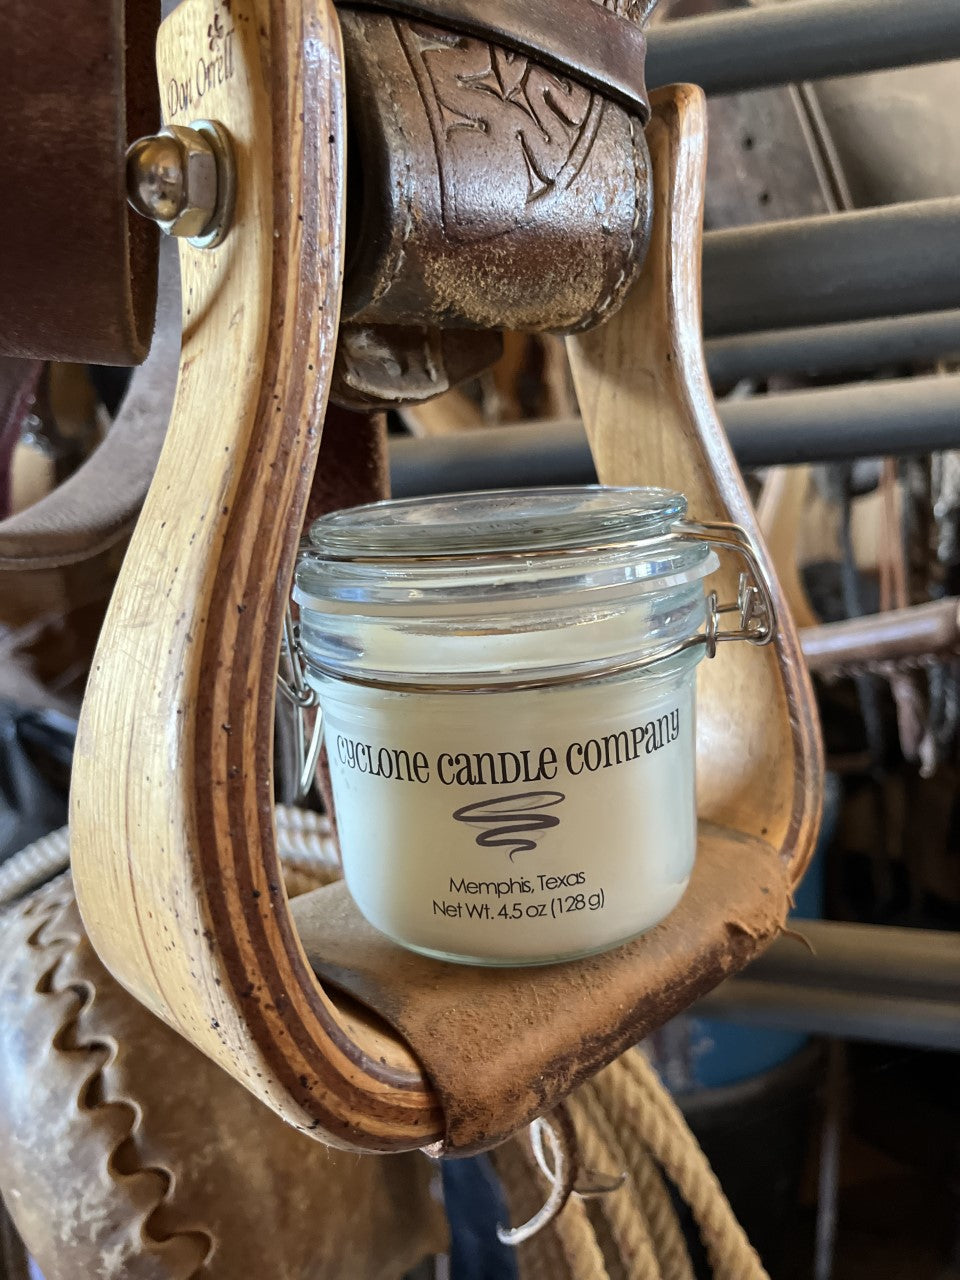 SADDLE & TACK:  While stepping into the tack room, this fragrance portrays scents of leather saddles, bridles, bits, and saddle pads.